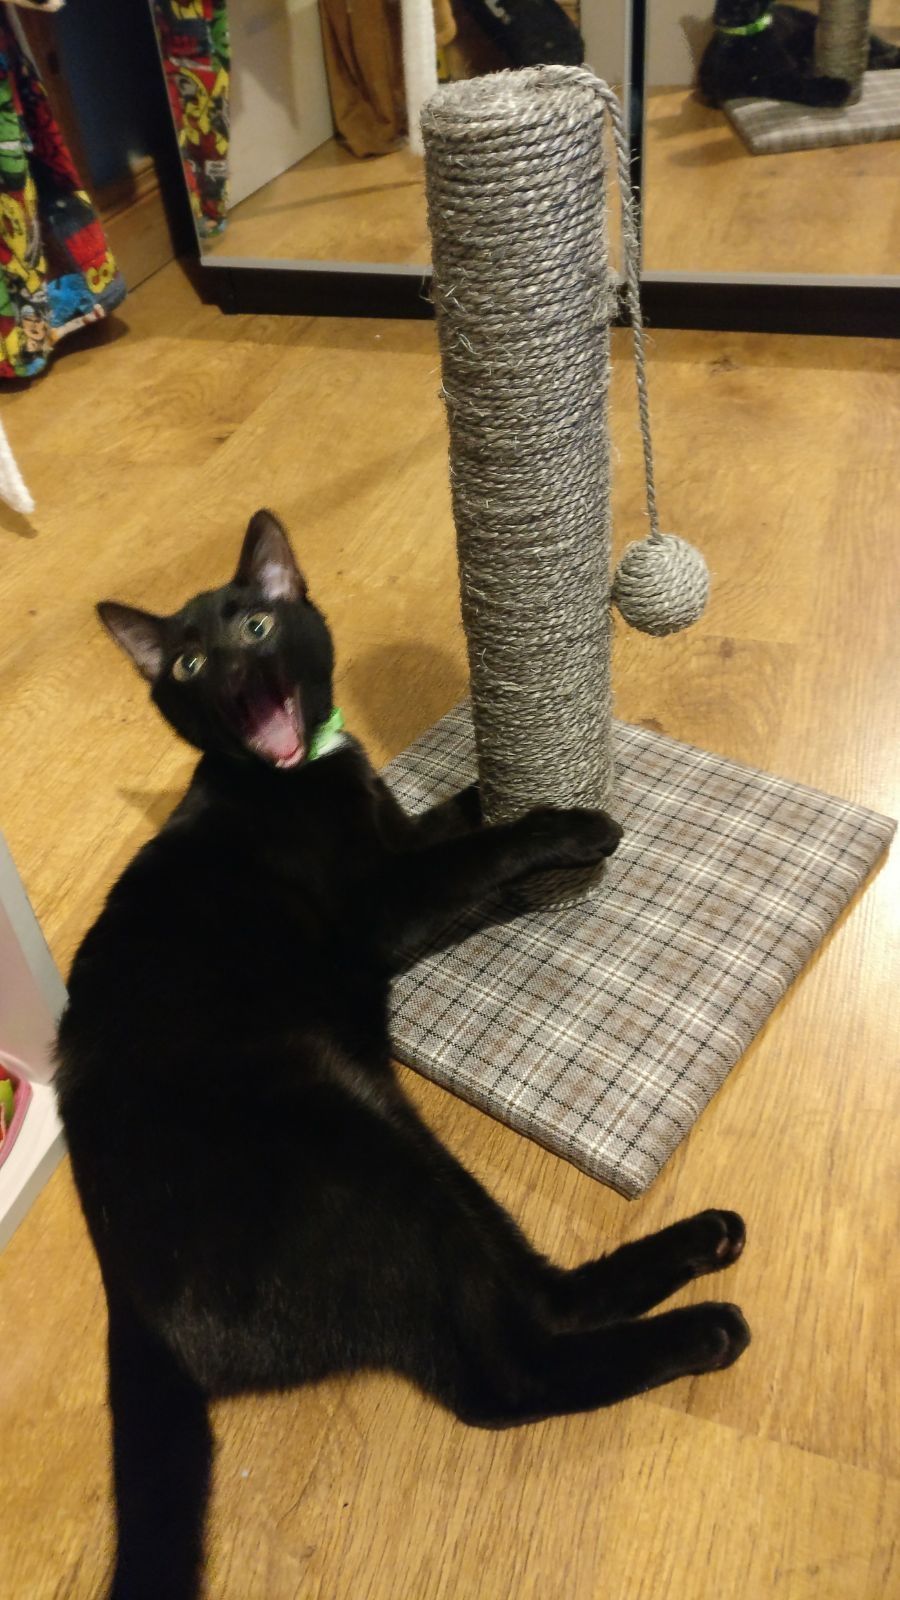 We got our cat a new scratch post. Something tells me he's happy with it.